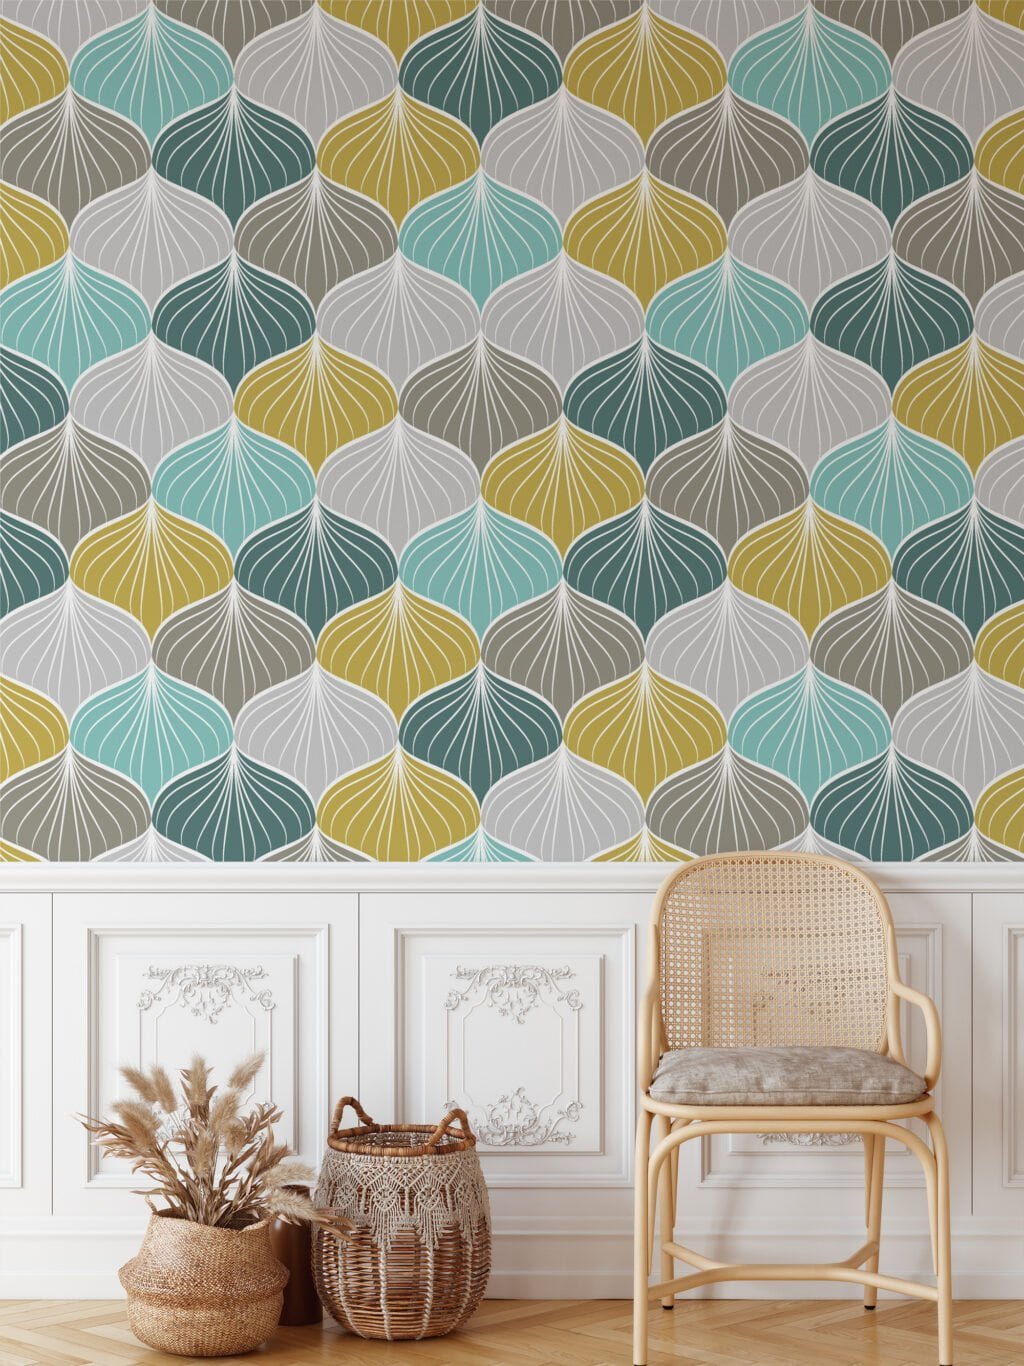 Colorful Abstract Shell Pattern Wallpaper, Modern Geometric Scallop Peel & Stick Wall Mural